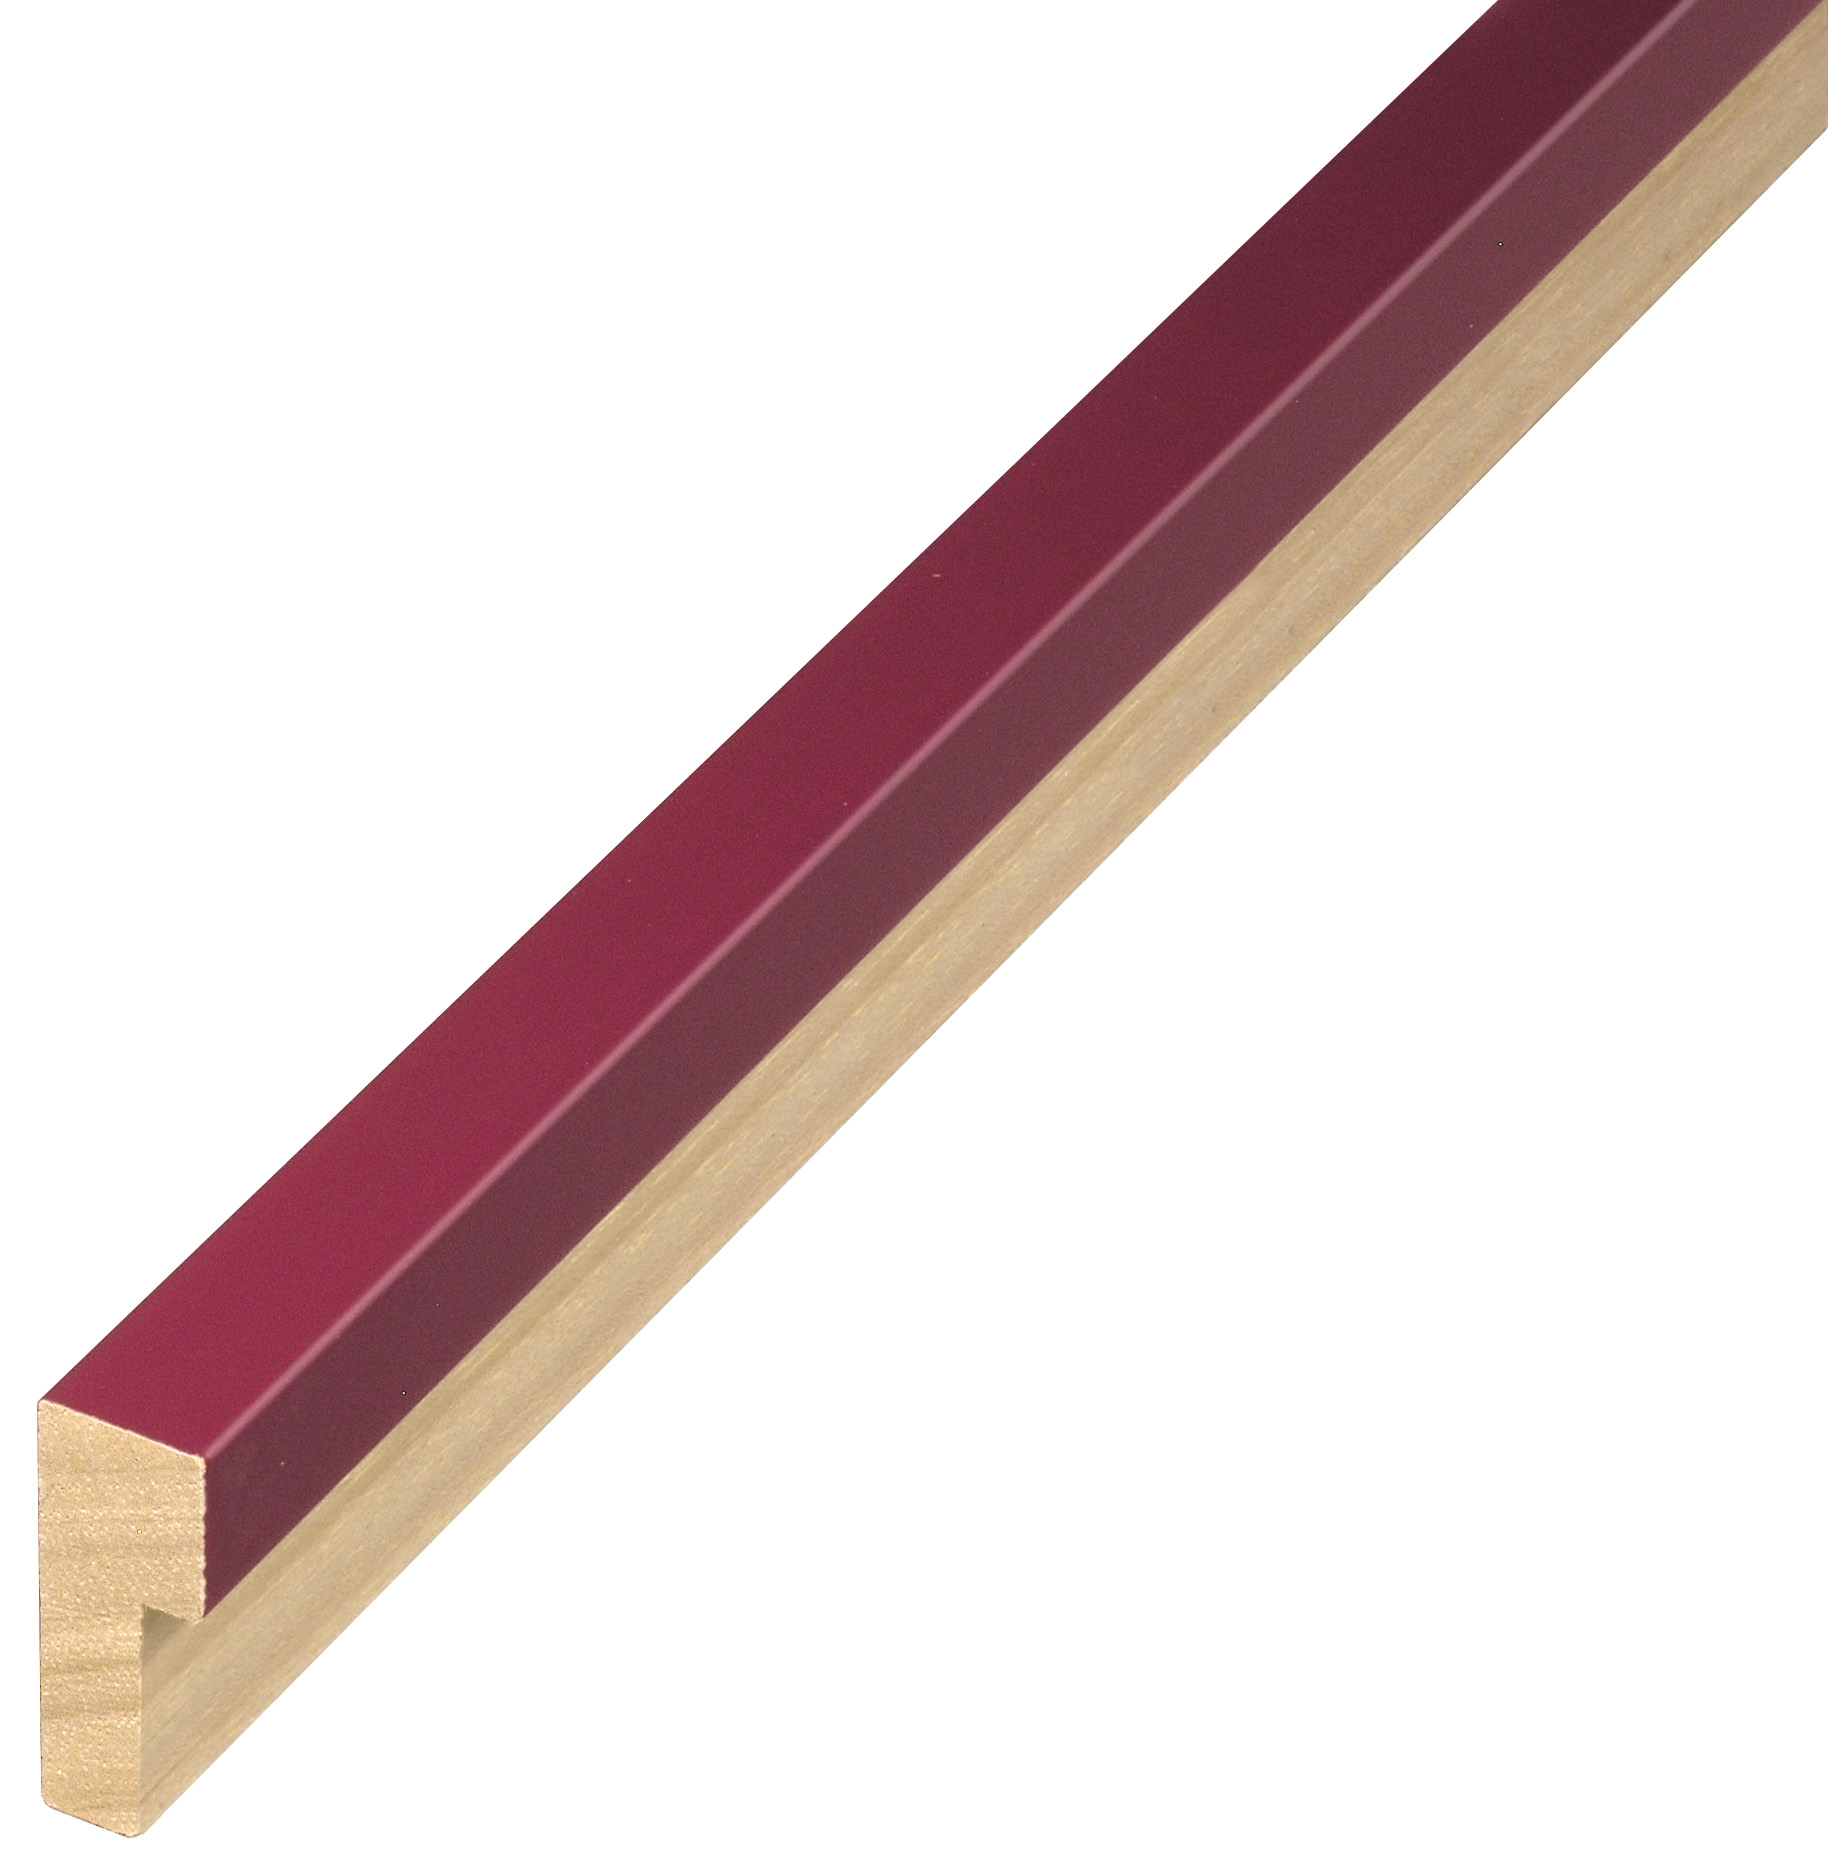 Moulding ayous - Widht 15 mm - Height 40 mm - Violet